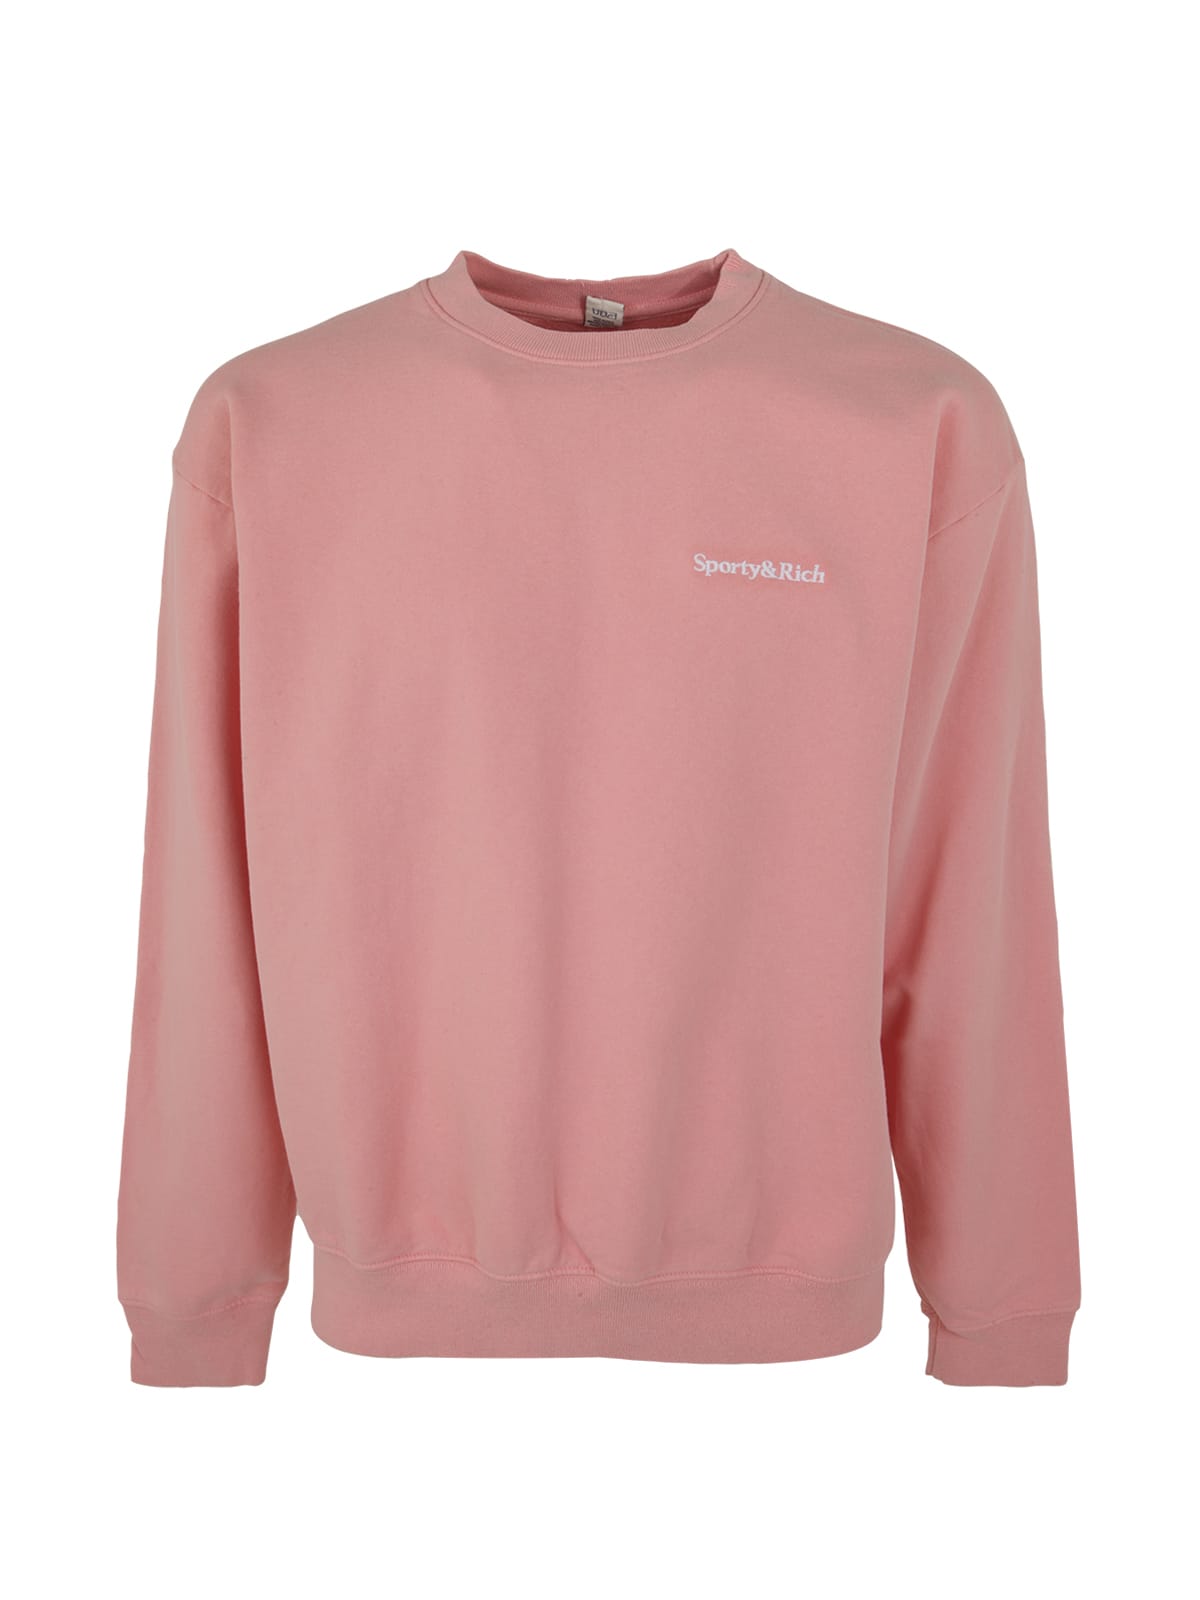 Sporty & Rich Serif Embroidered Crewneck